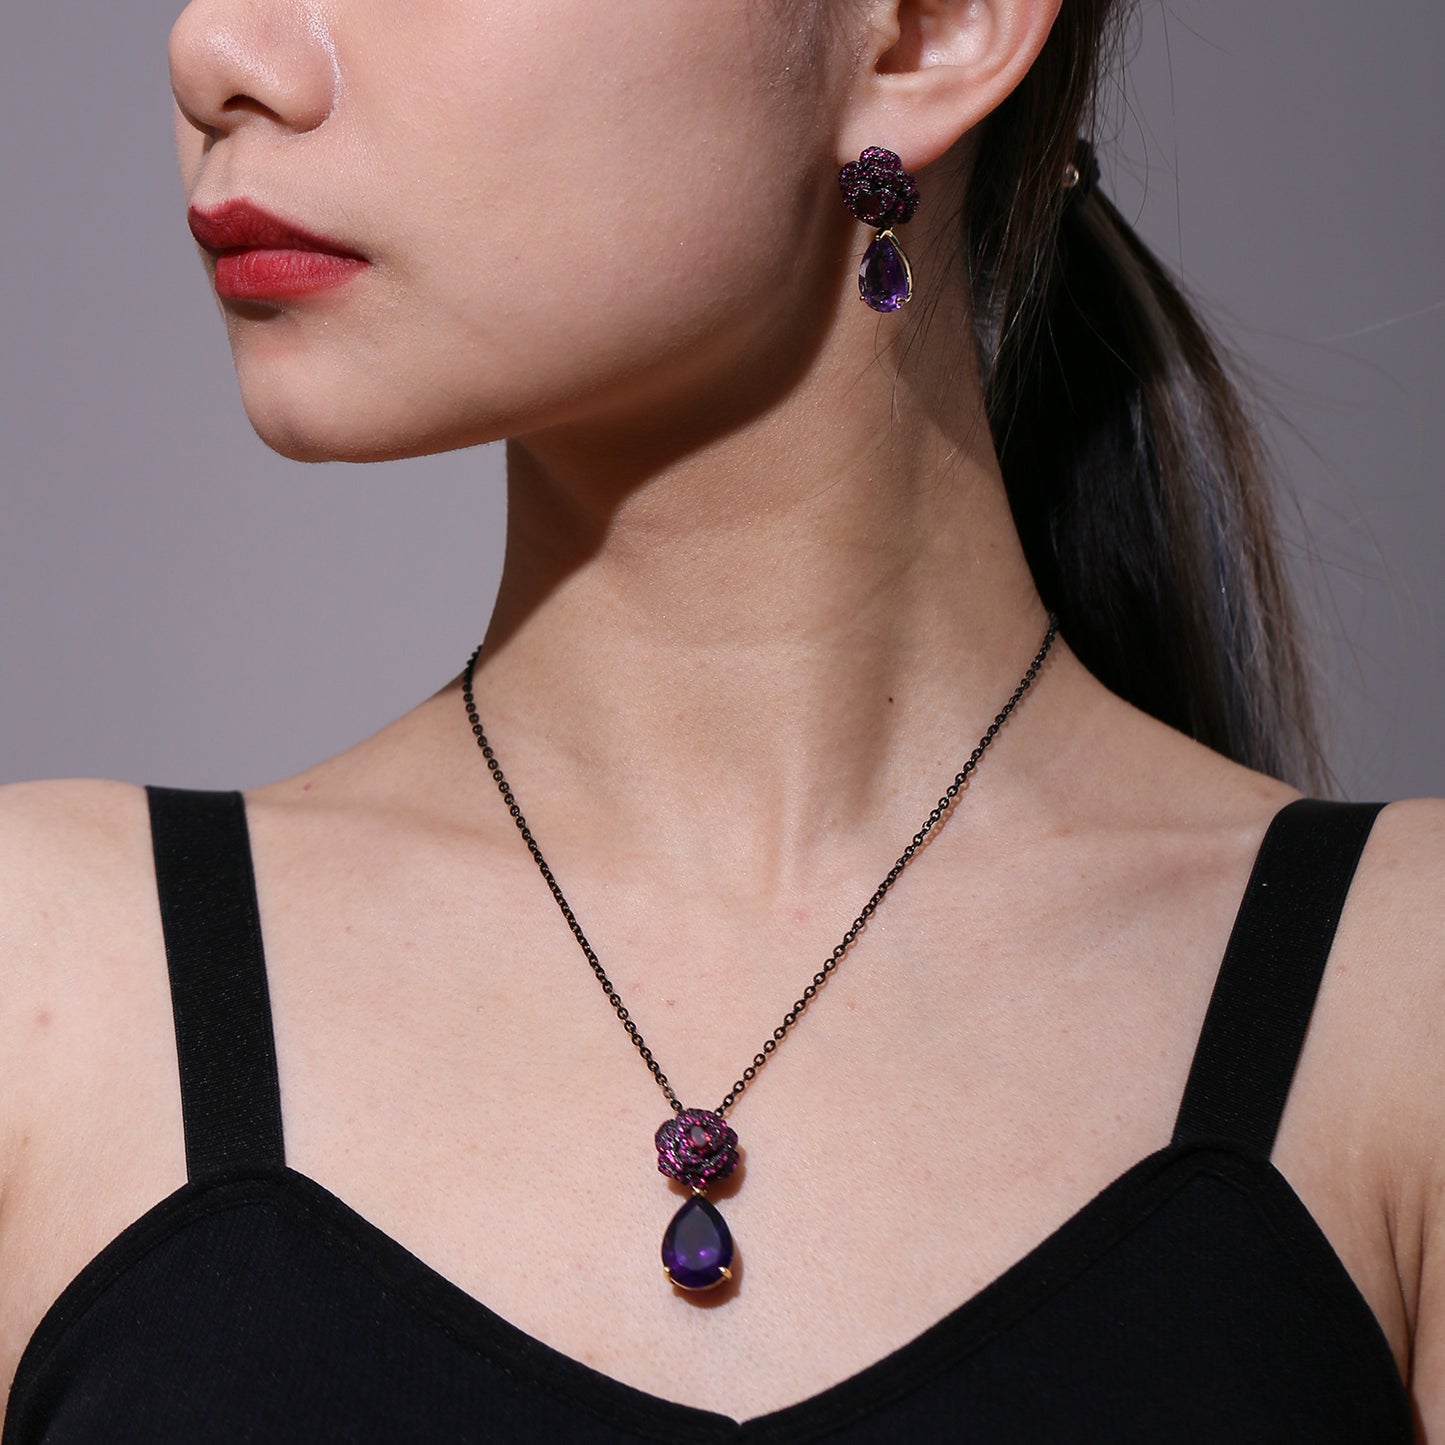 Charm Luxury Style Inlaid Gemstones with Natural Amethyst Rose Tears Pendant Silver Necklace for Women